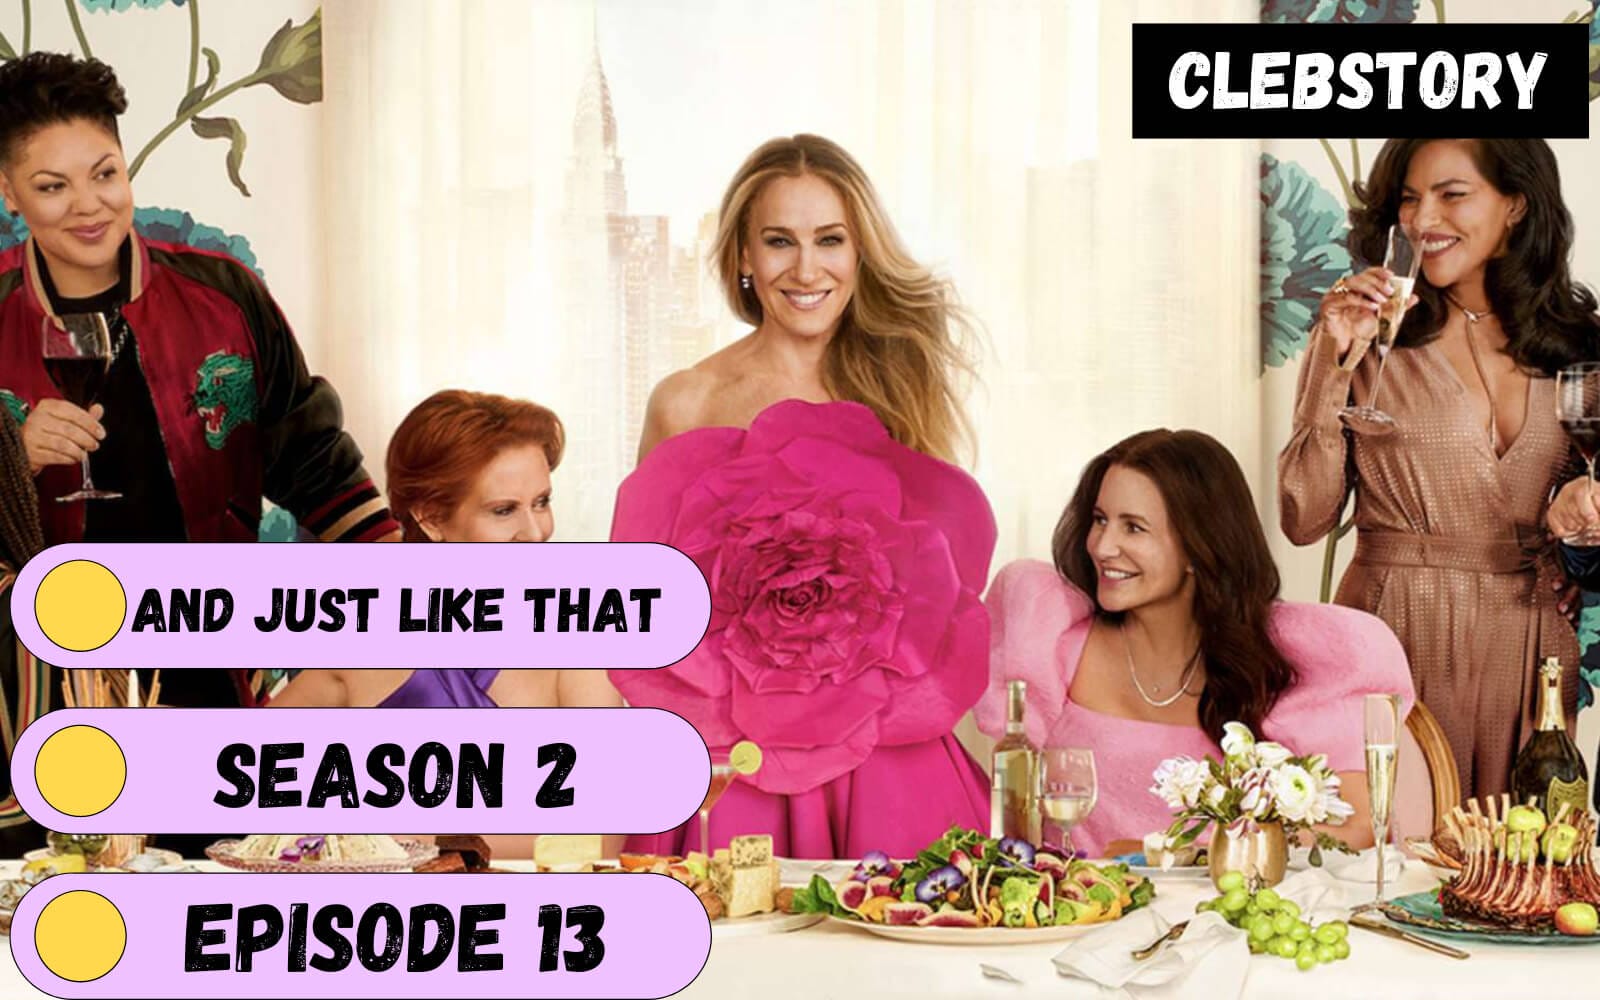 And Just Like That Season 2 Episode 13 Release date